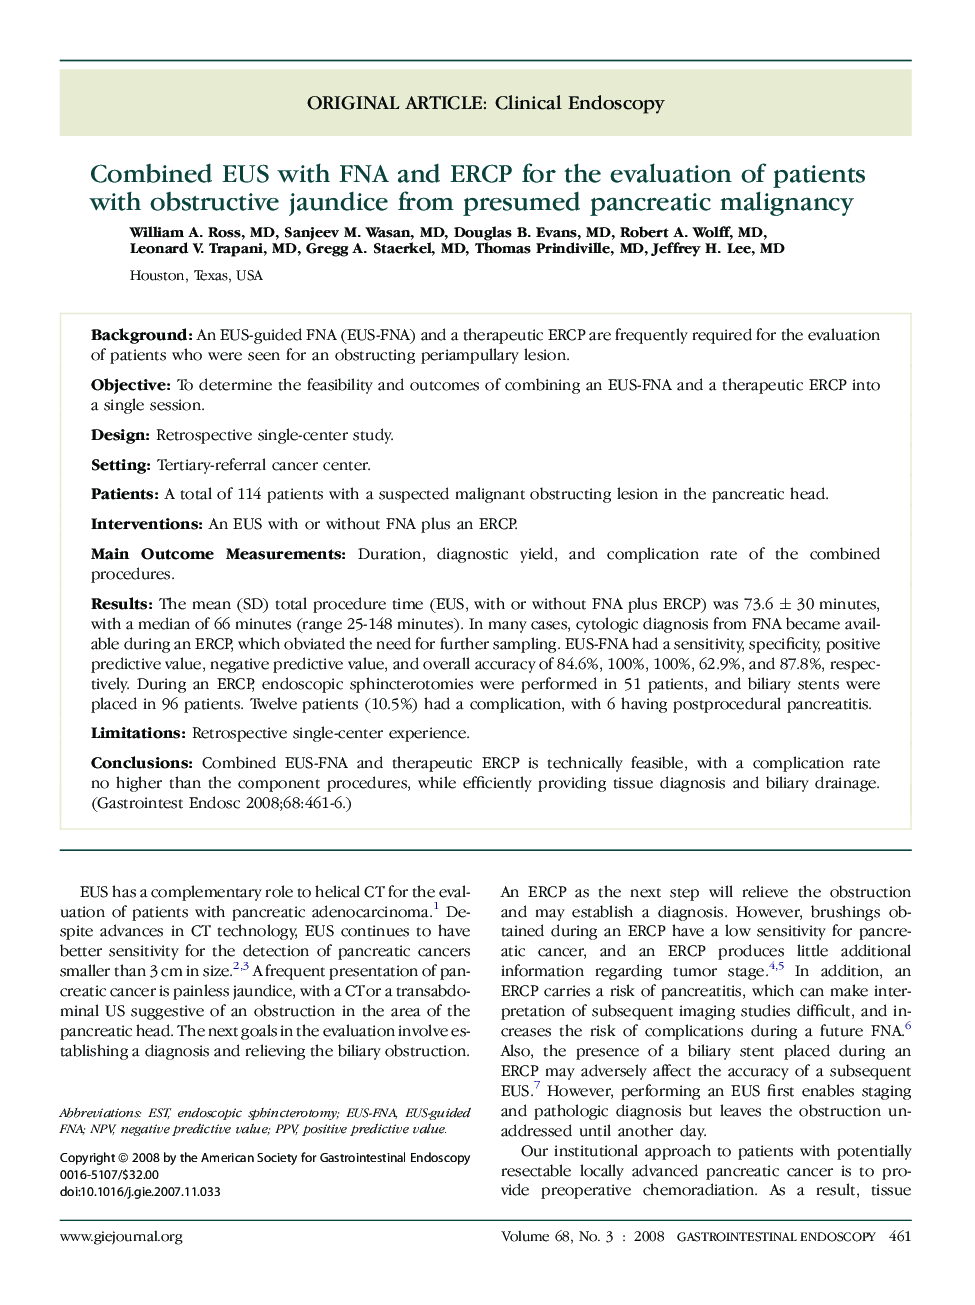 Combined EUS with FNA and ERCP for the evaluation of patients with obstructive jaundice from presumed pancreatic malignancy